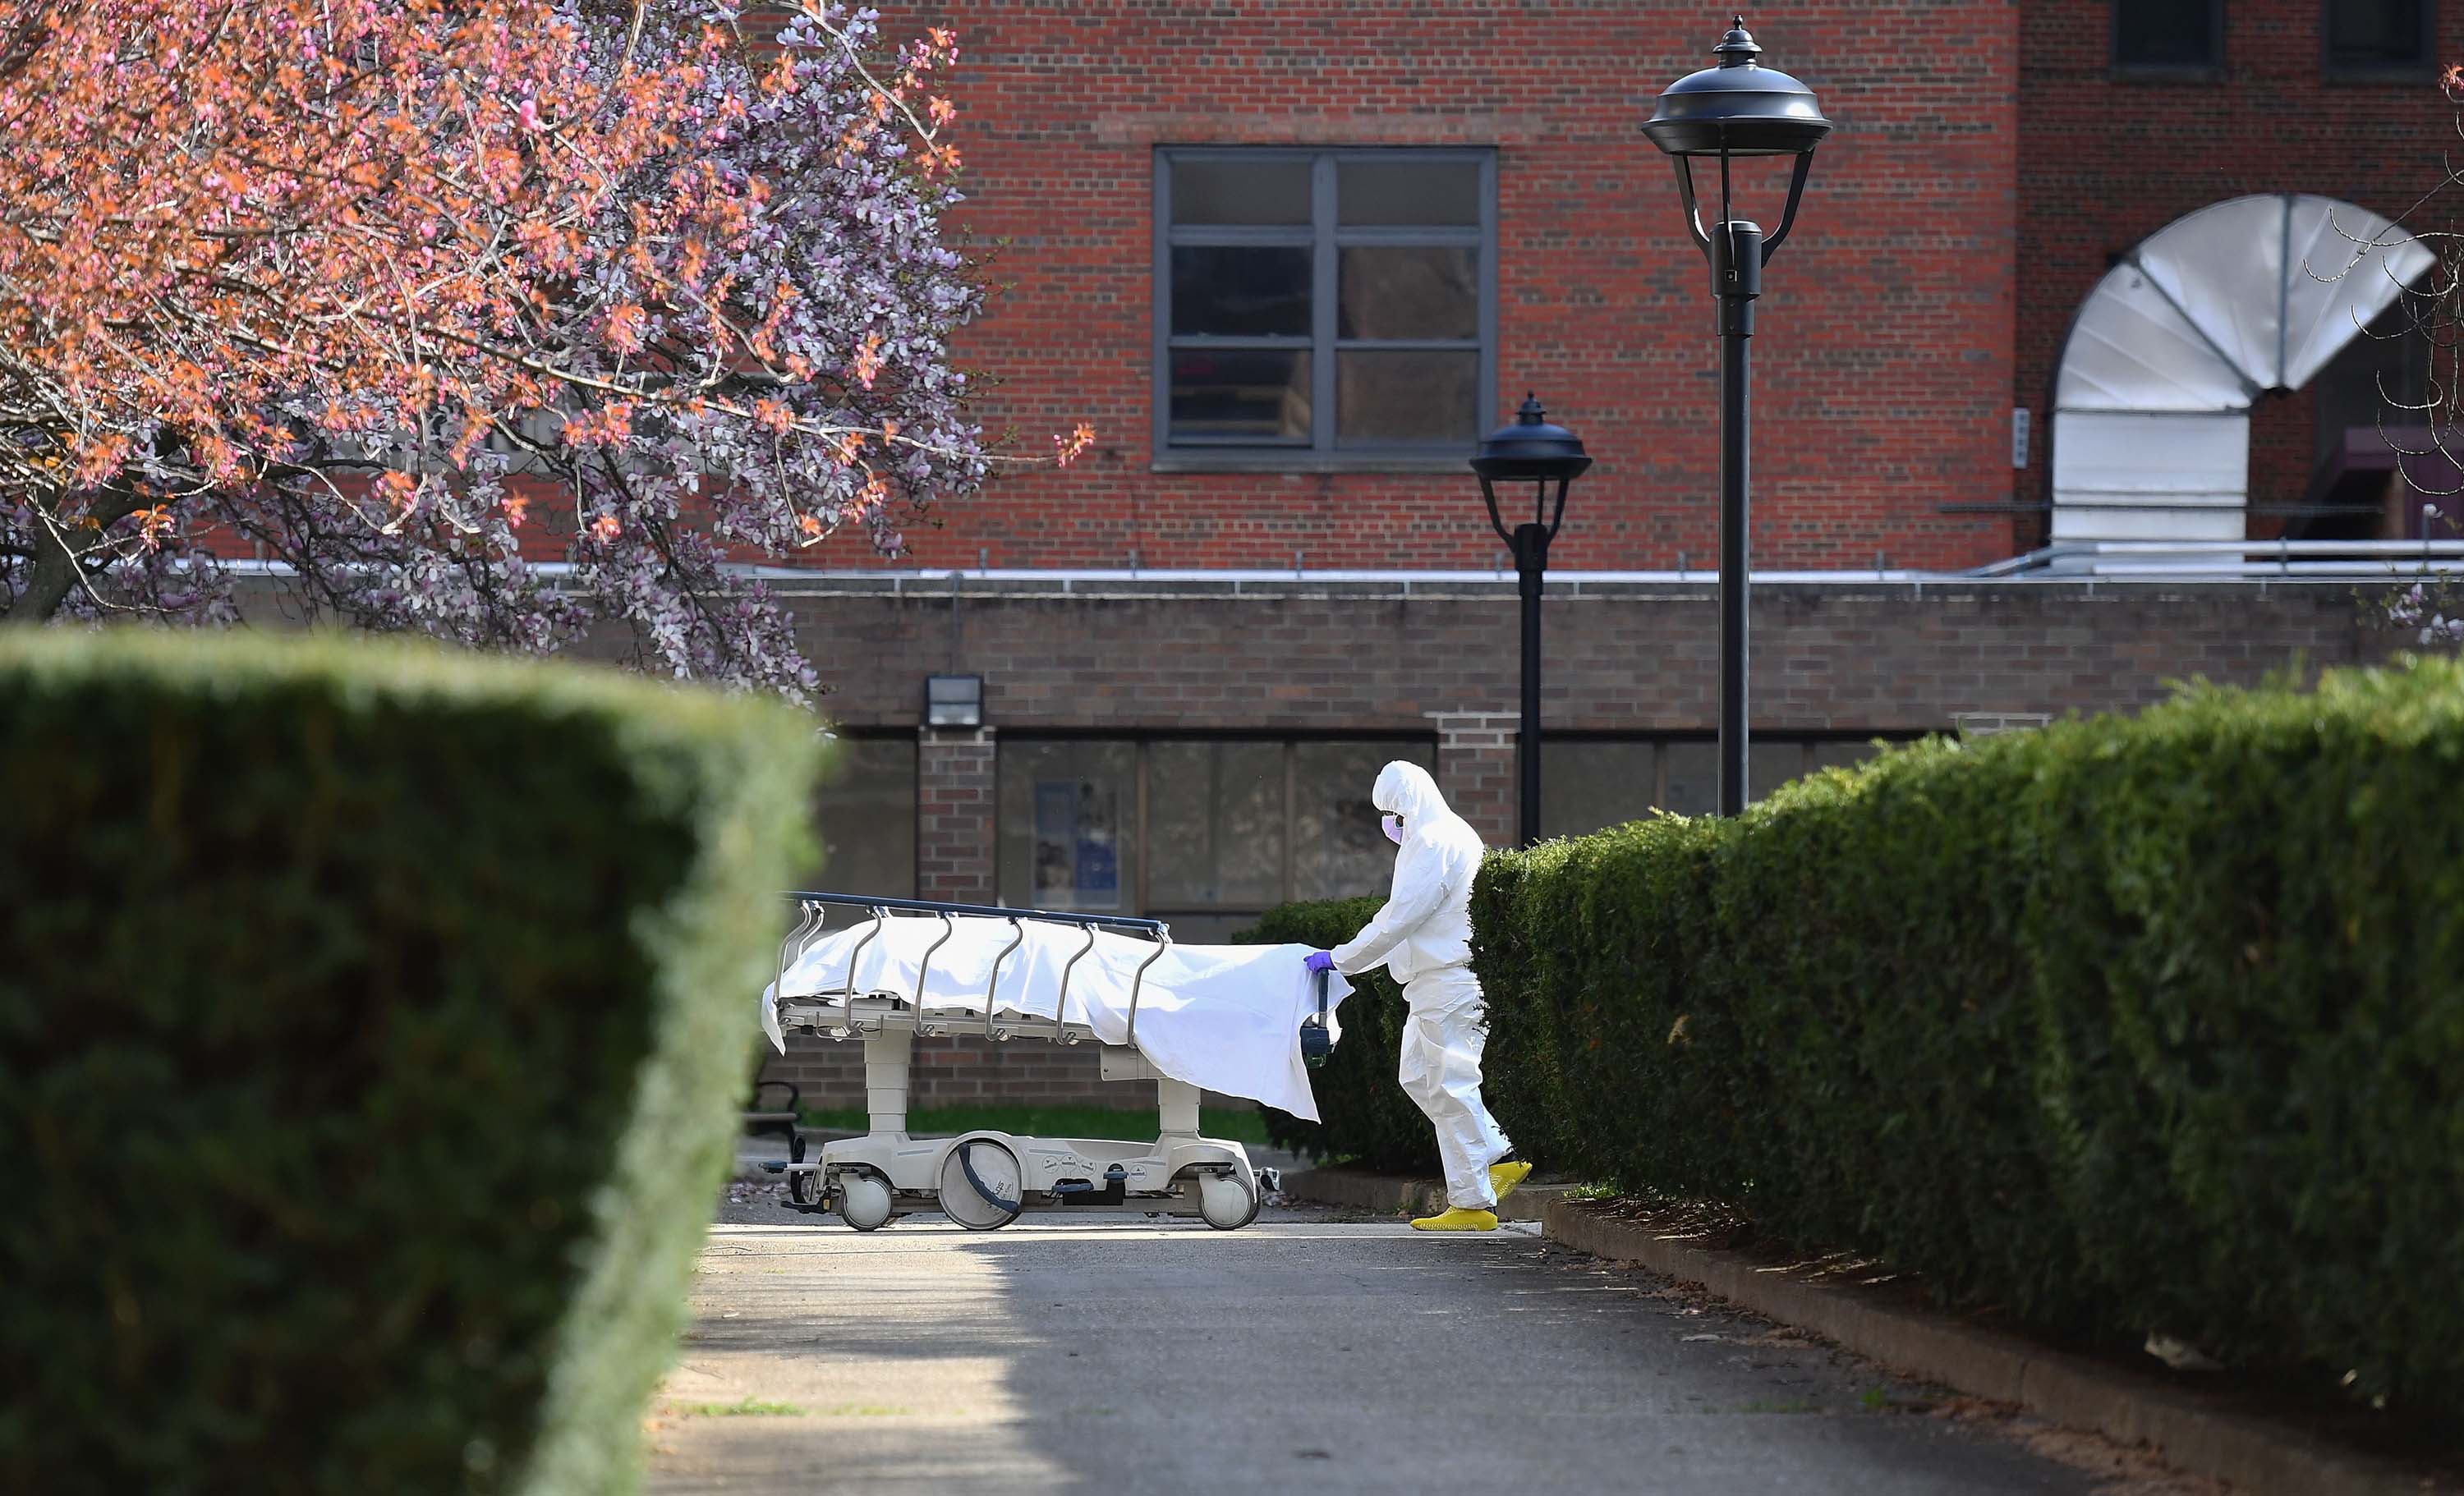 Medical personnel transport the body of a deceased coronavirus patient in Brooklyn, New York, on April 8.